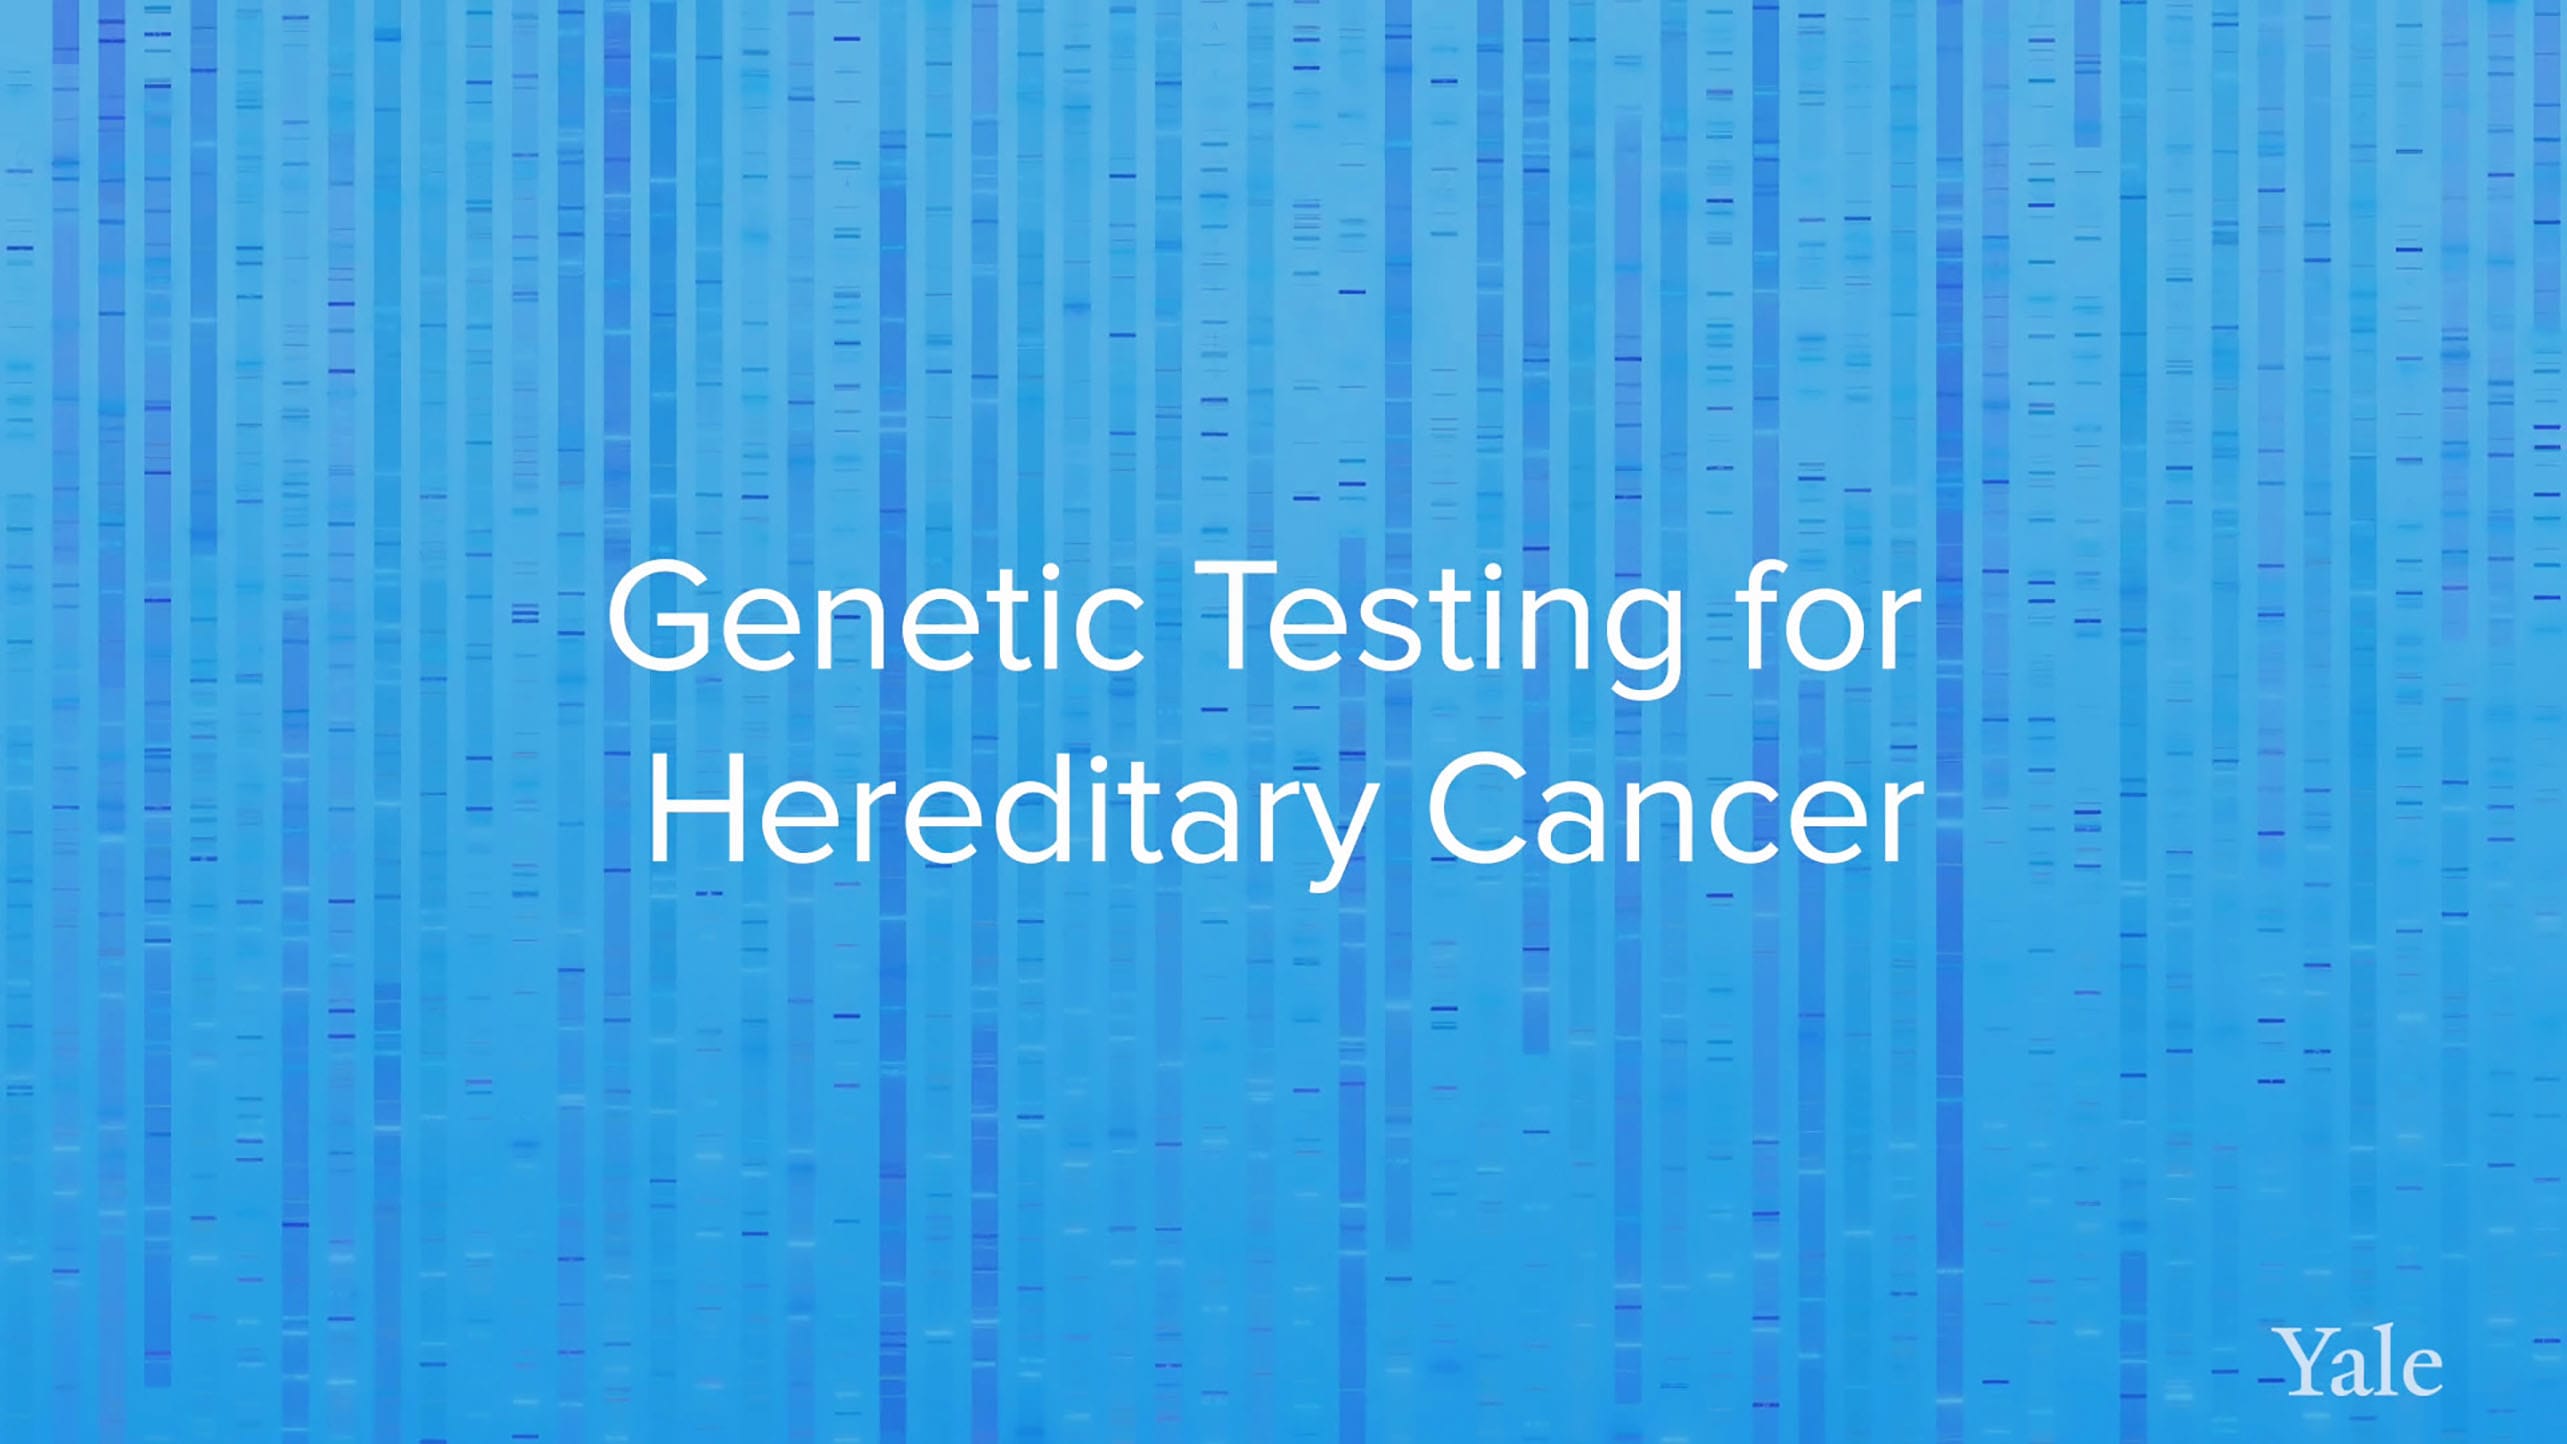 Genetic Screening for Cancer